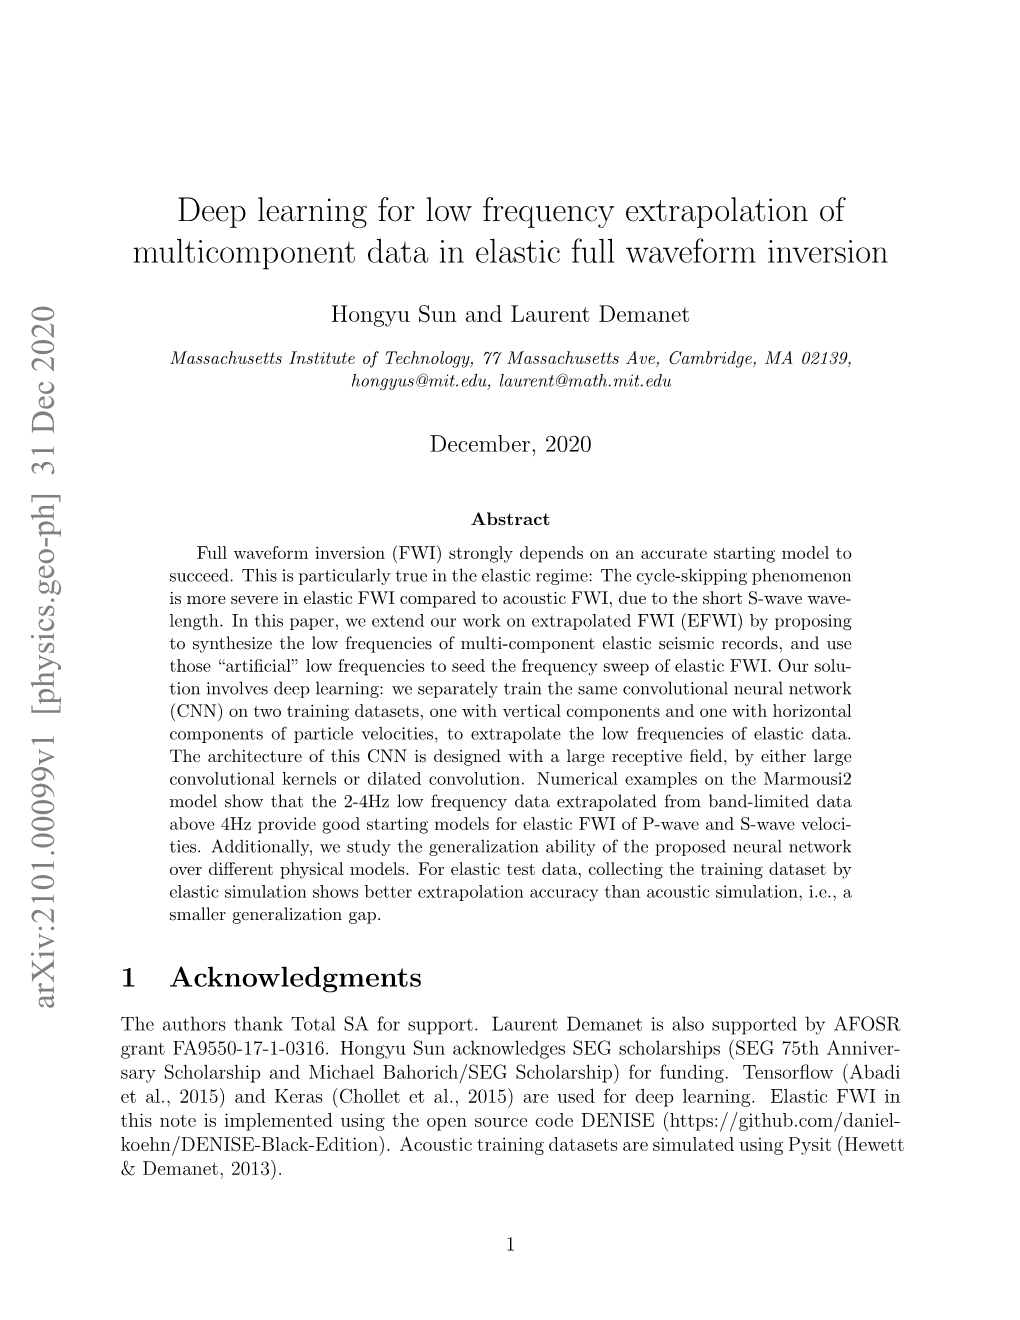 Deep Learning for Low Frequency Extrapolation of Multicomponent Data in Elastic Full Waveform Inversion